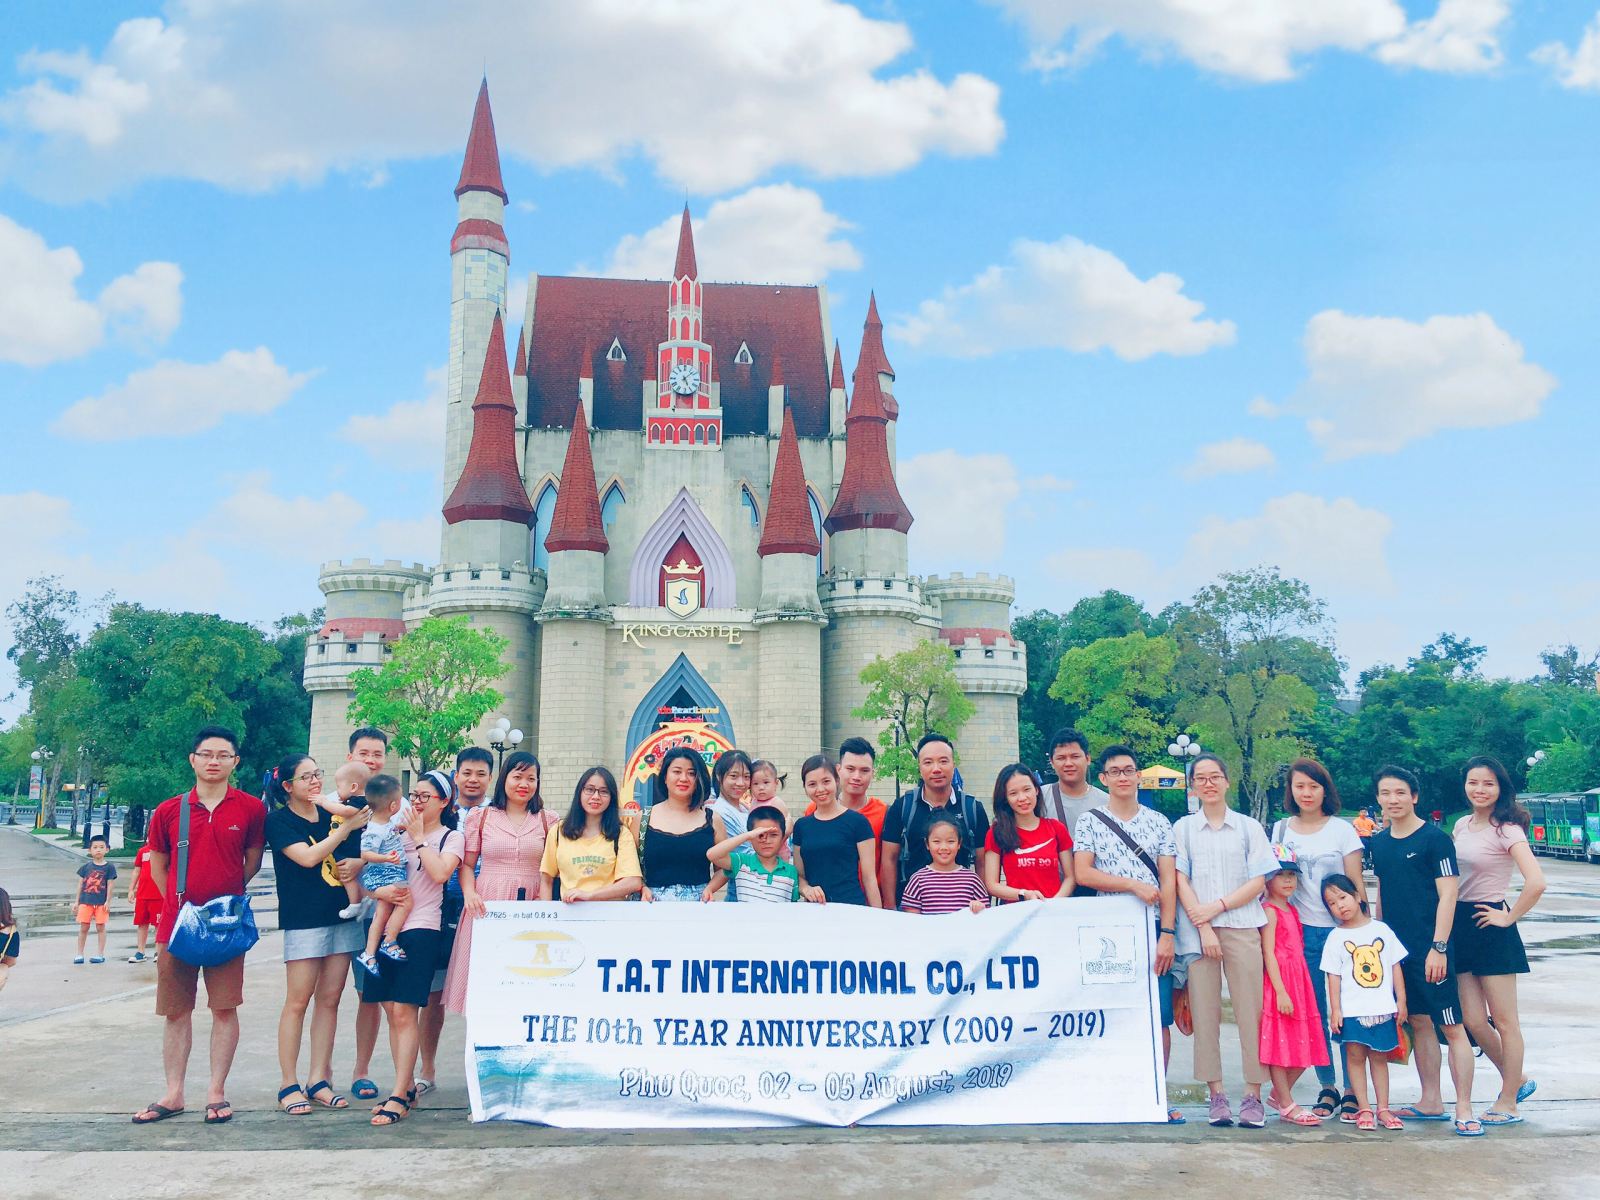 SUMMER TRAVEL 2019 – THE 10TH YEAR ANNIVERSARY OF T.A.T INTERNATIONAL CO., LTD.